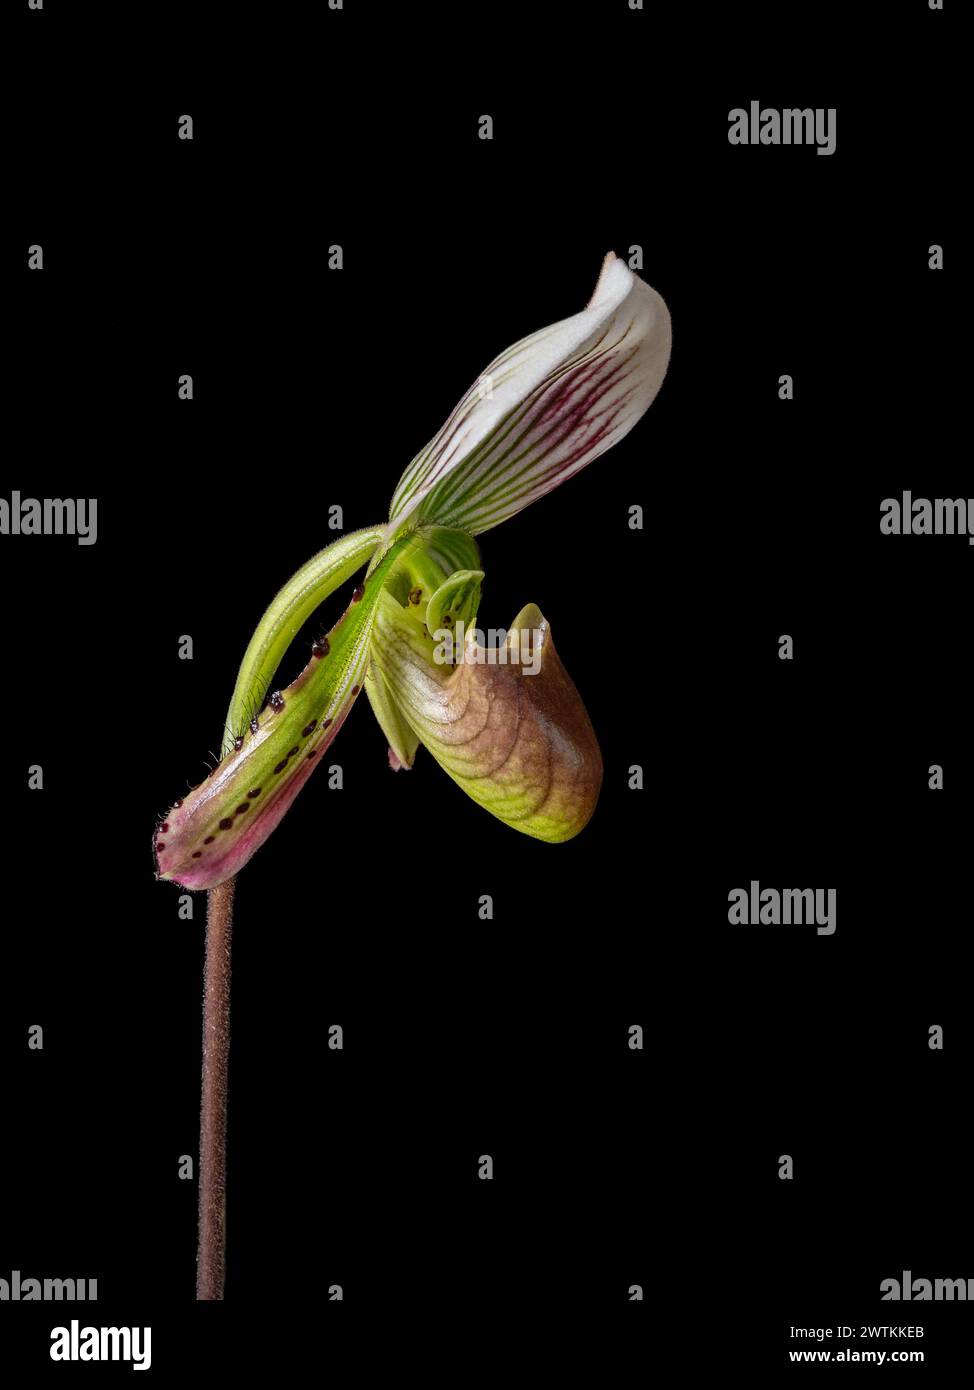 Closeup side view of colorful purple green and white flower of lady slipper orchid species paphiopedilum callosum isolated on black background Stock Photo